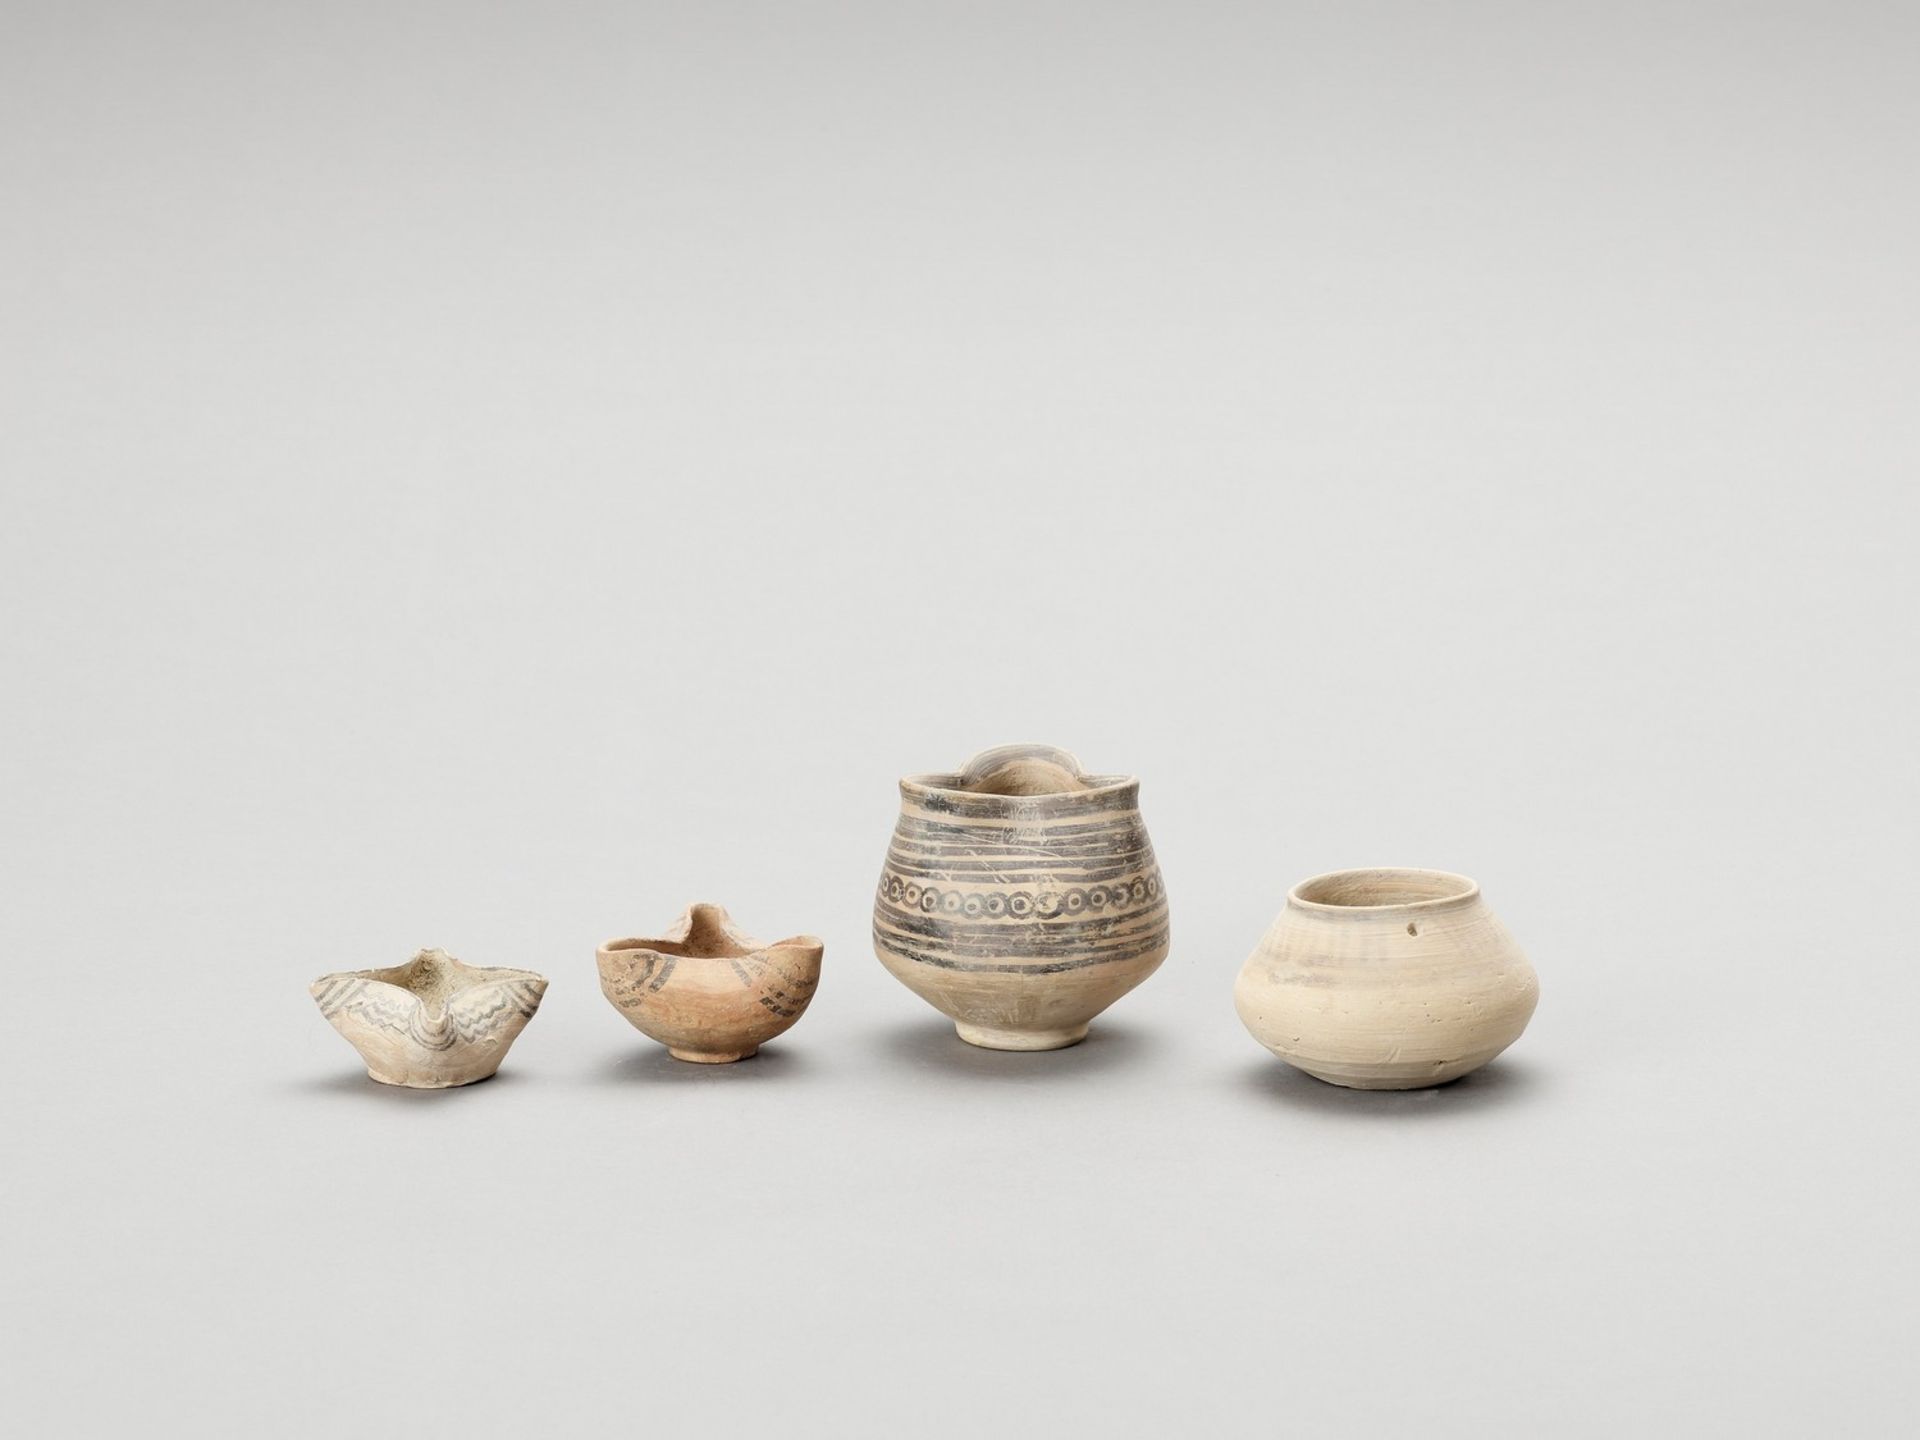 FOUR ANTIQUE CERAMIC OIL LAMPS FROM INDUS VALLEY - Image 3 of 4